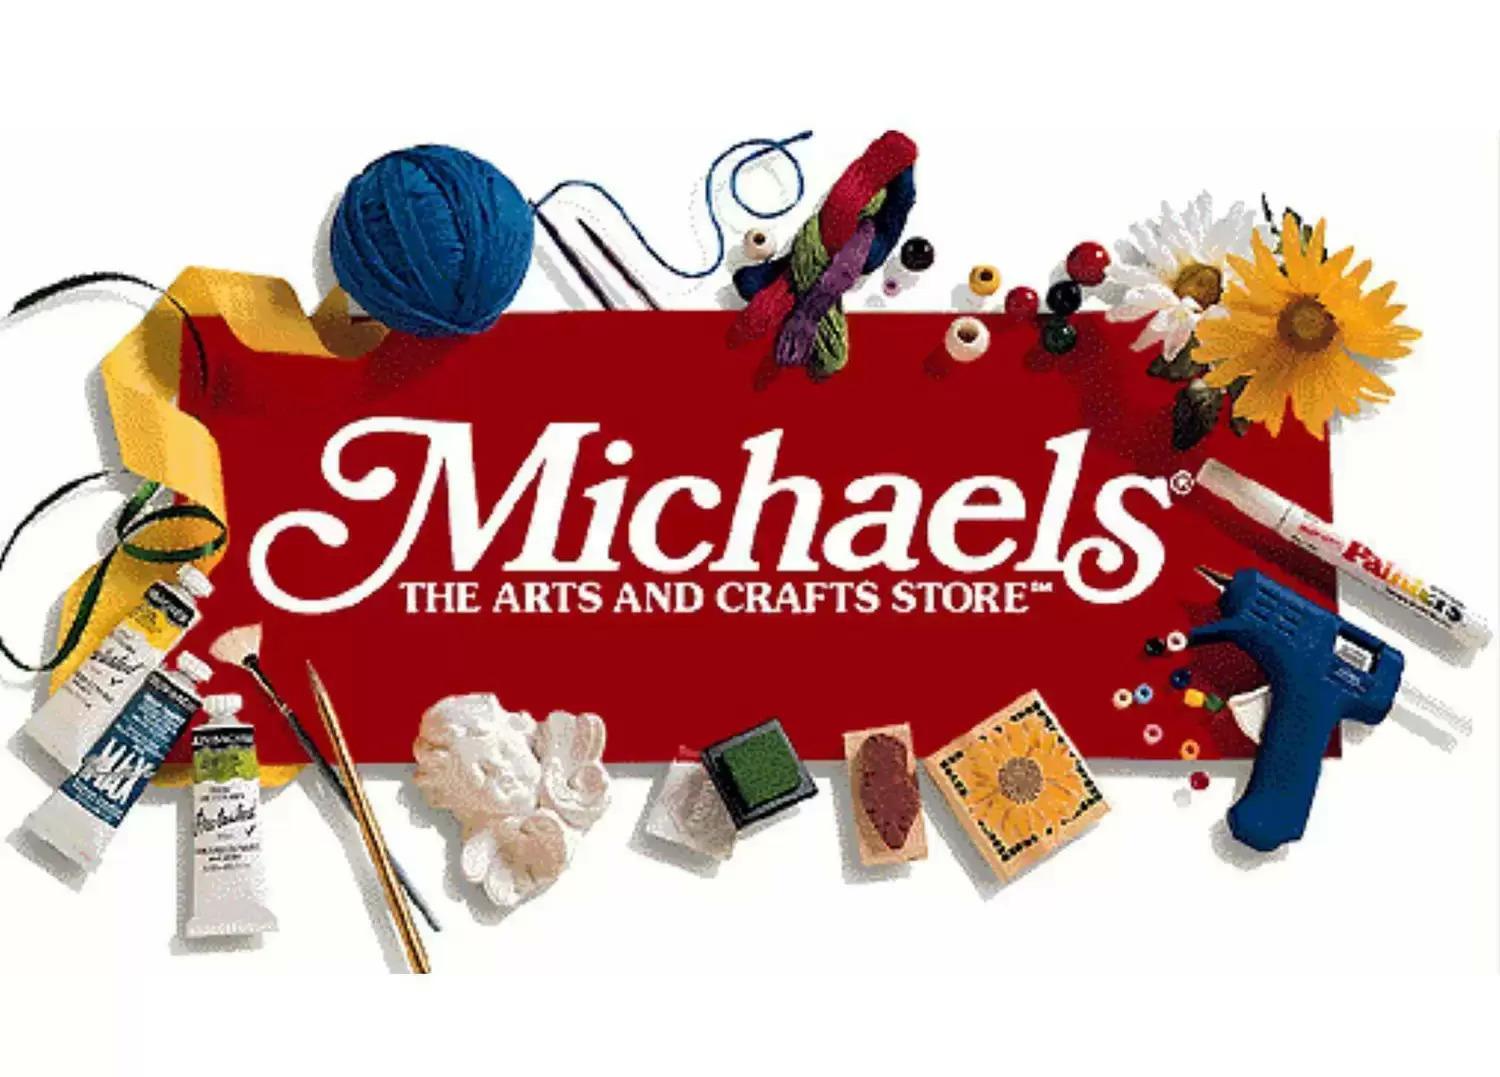 Michaels Discounted Gift Card 15% Off